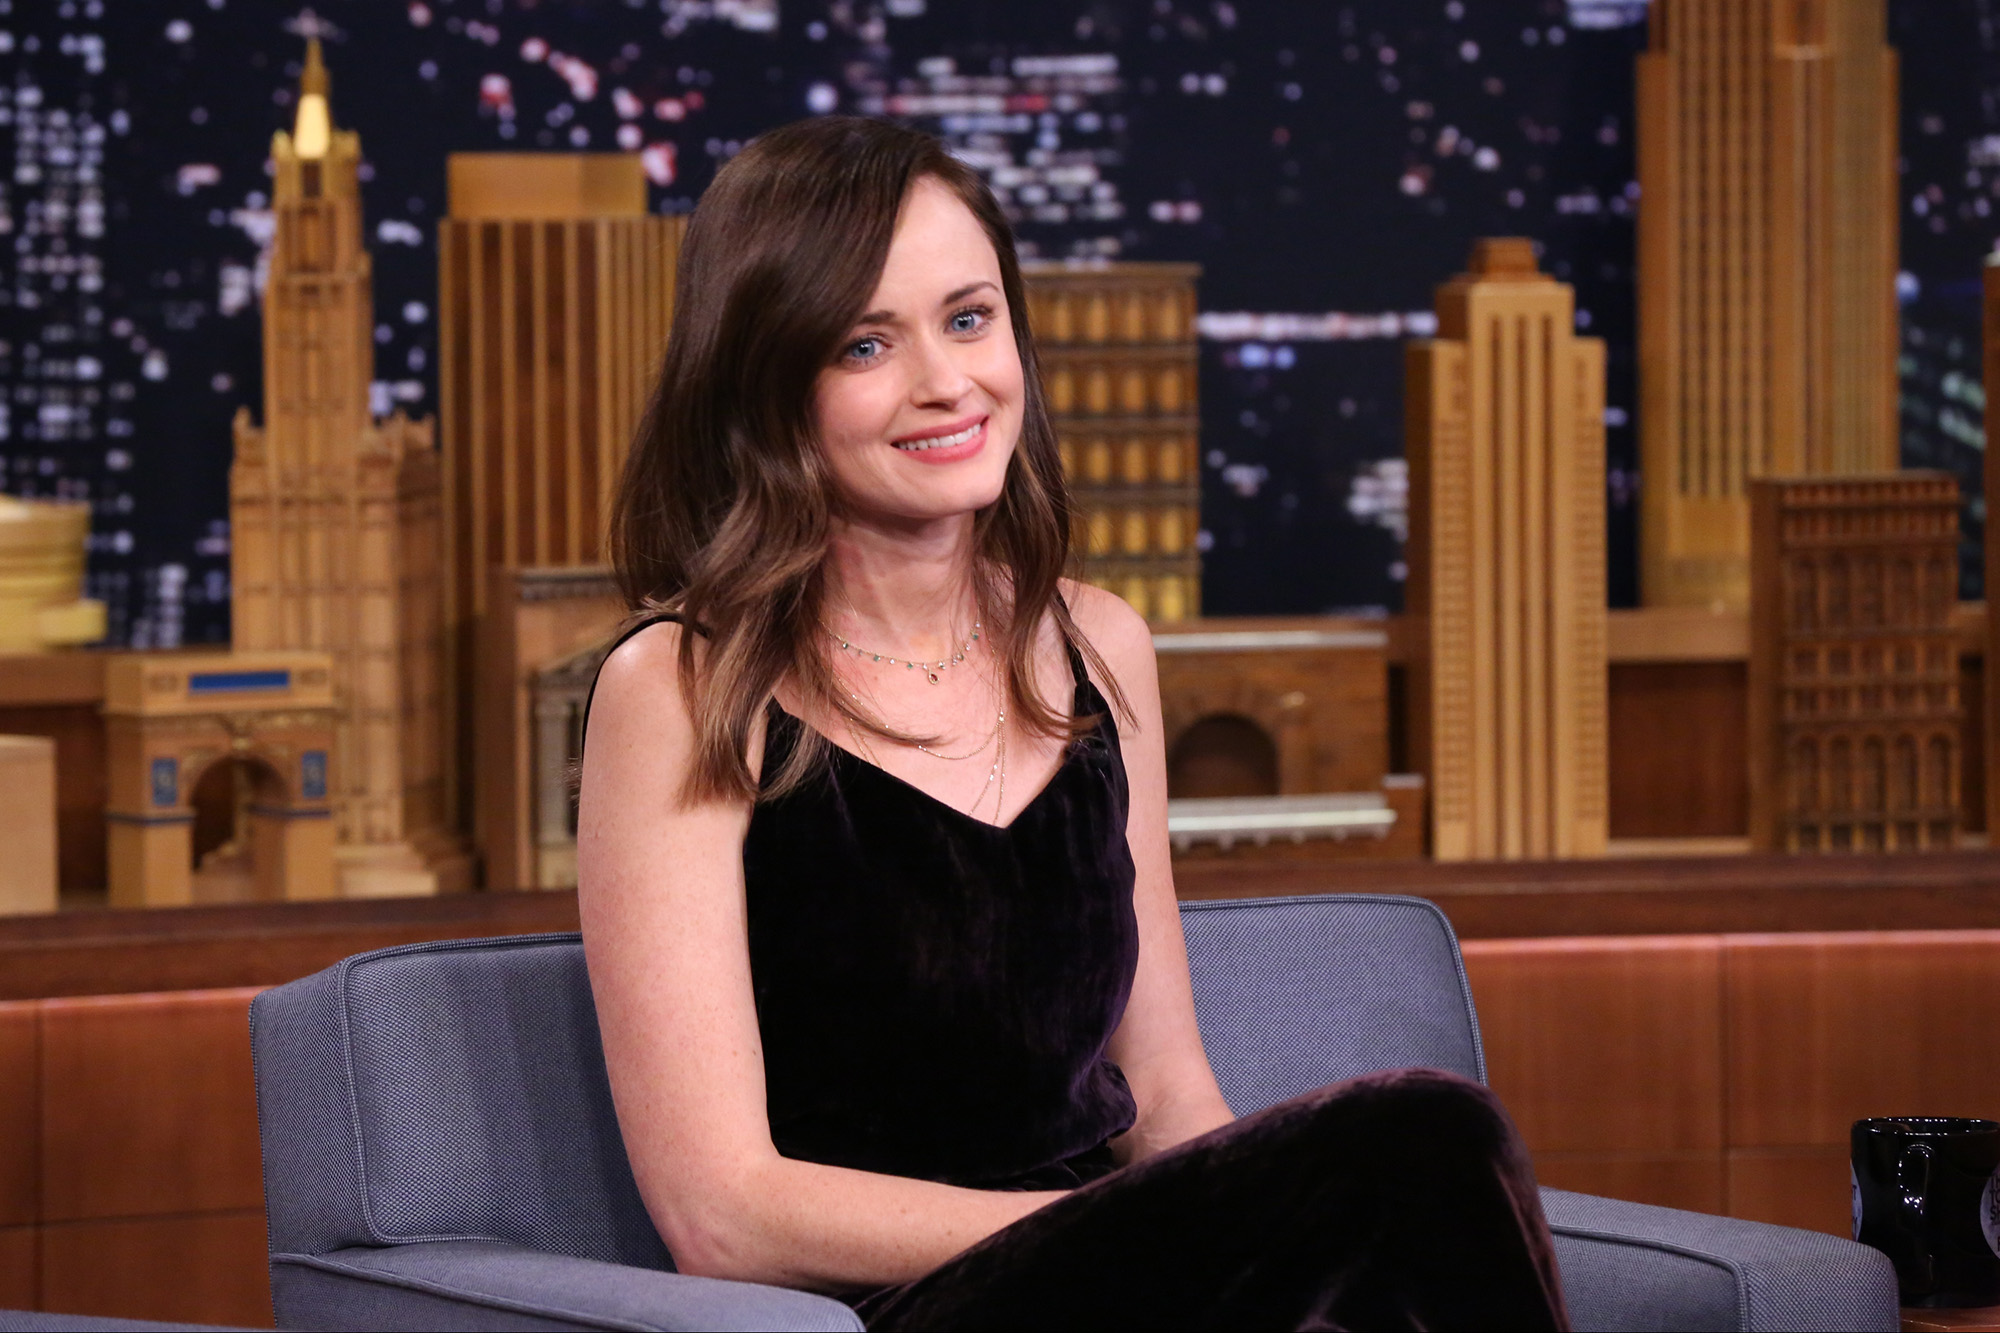 Alexis Bledel during an interview on November 28, 2016 -- (Photo by: Andrew Lipovsky/NBC/NBCU Photo Bank via Getty Images) (NBC&mdash;NBCU Photo Bank via Getty Images)